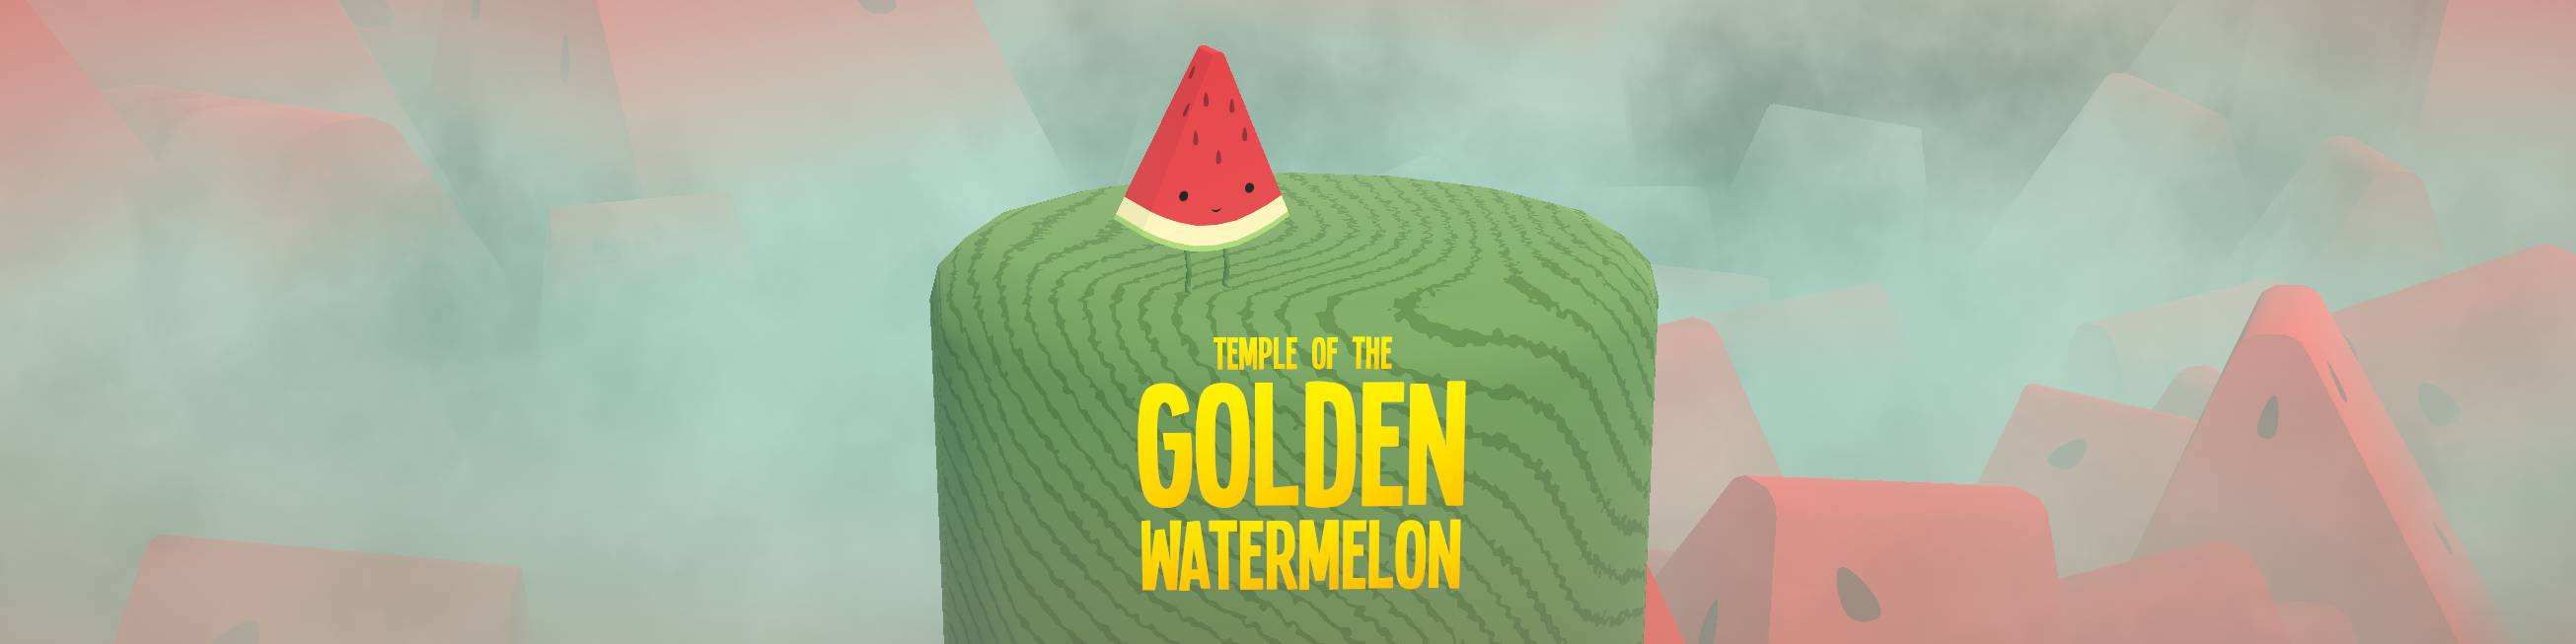 Gold minerwatermelon gaming chair